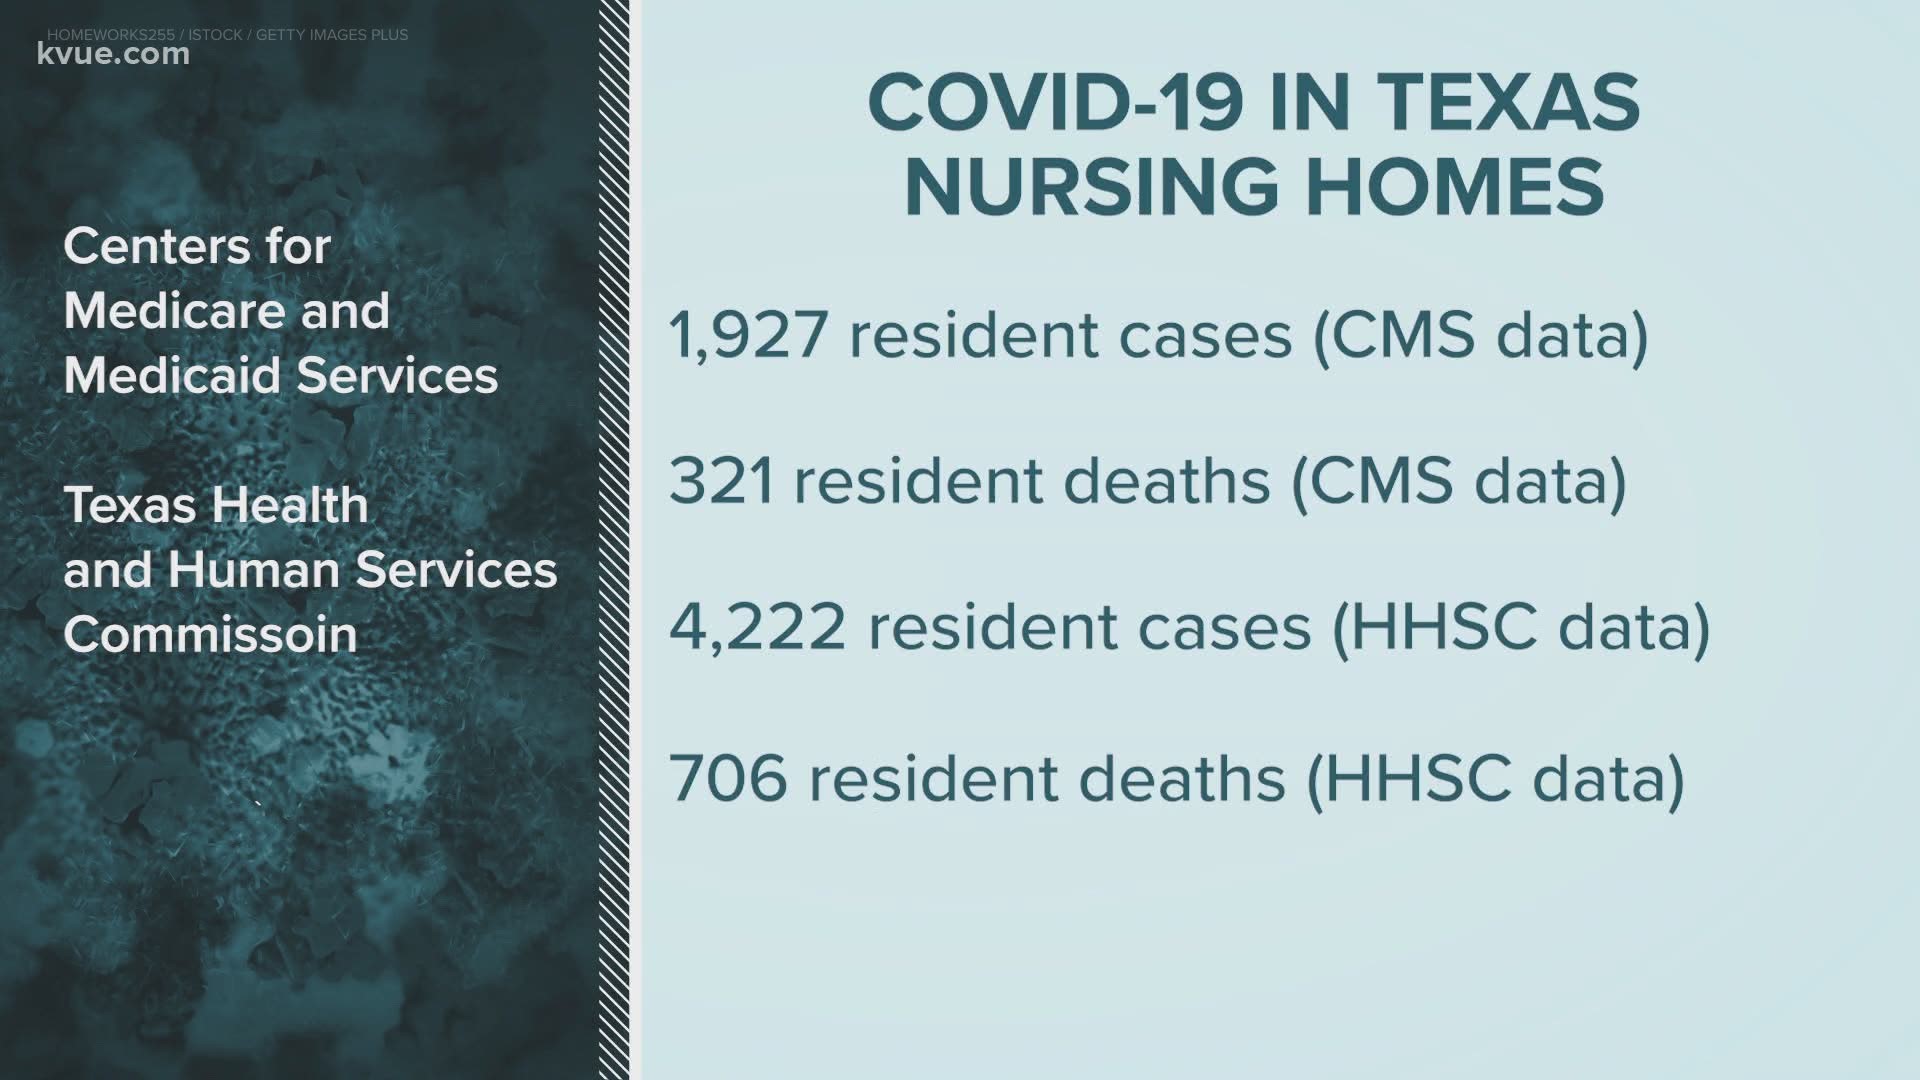 After months of requests from the KVUE Defenders, the federal government released data about COVID-19 in nursing homes across the country.